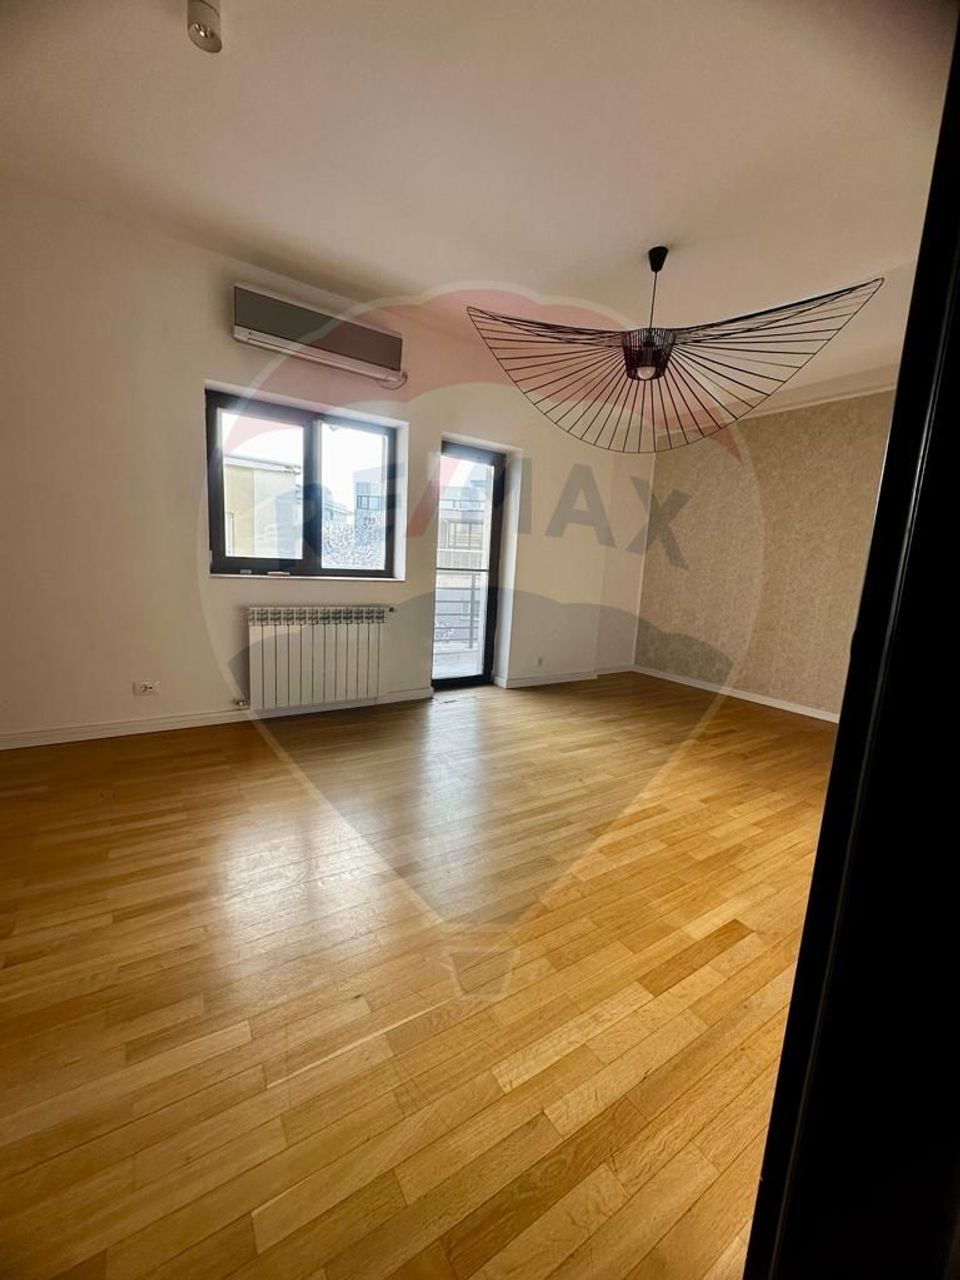 172sq.m Office Space for rent, Herastrau area